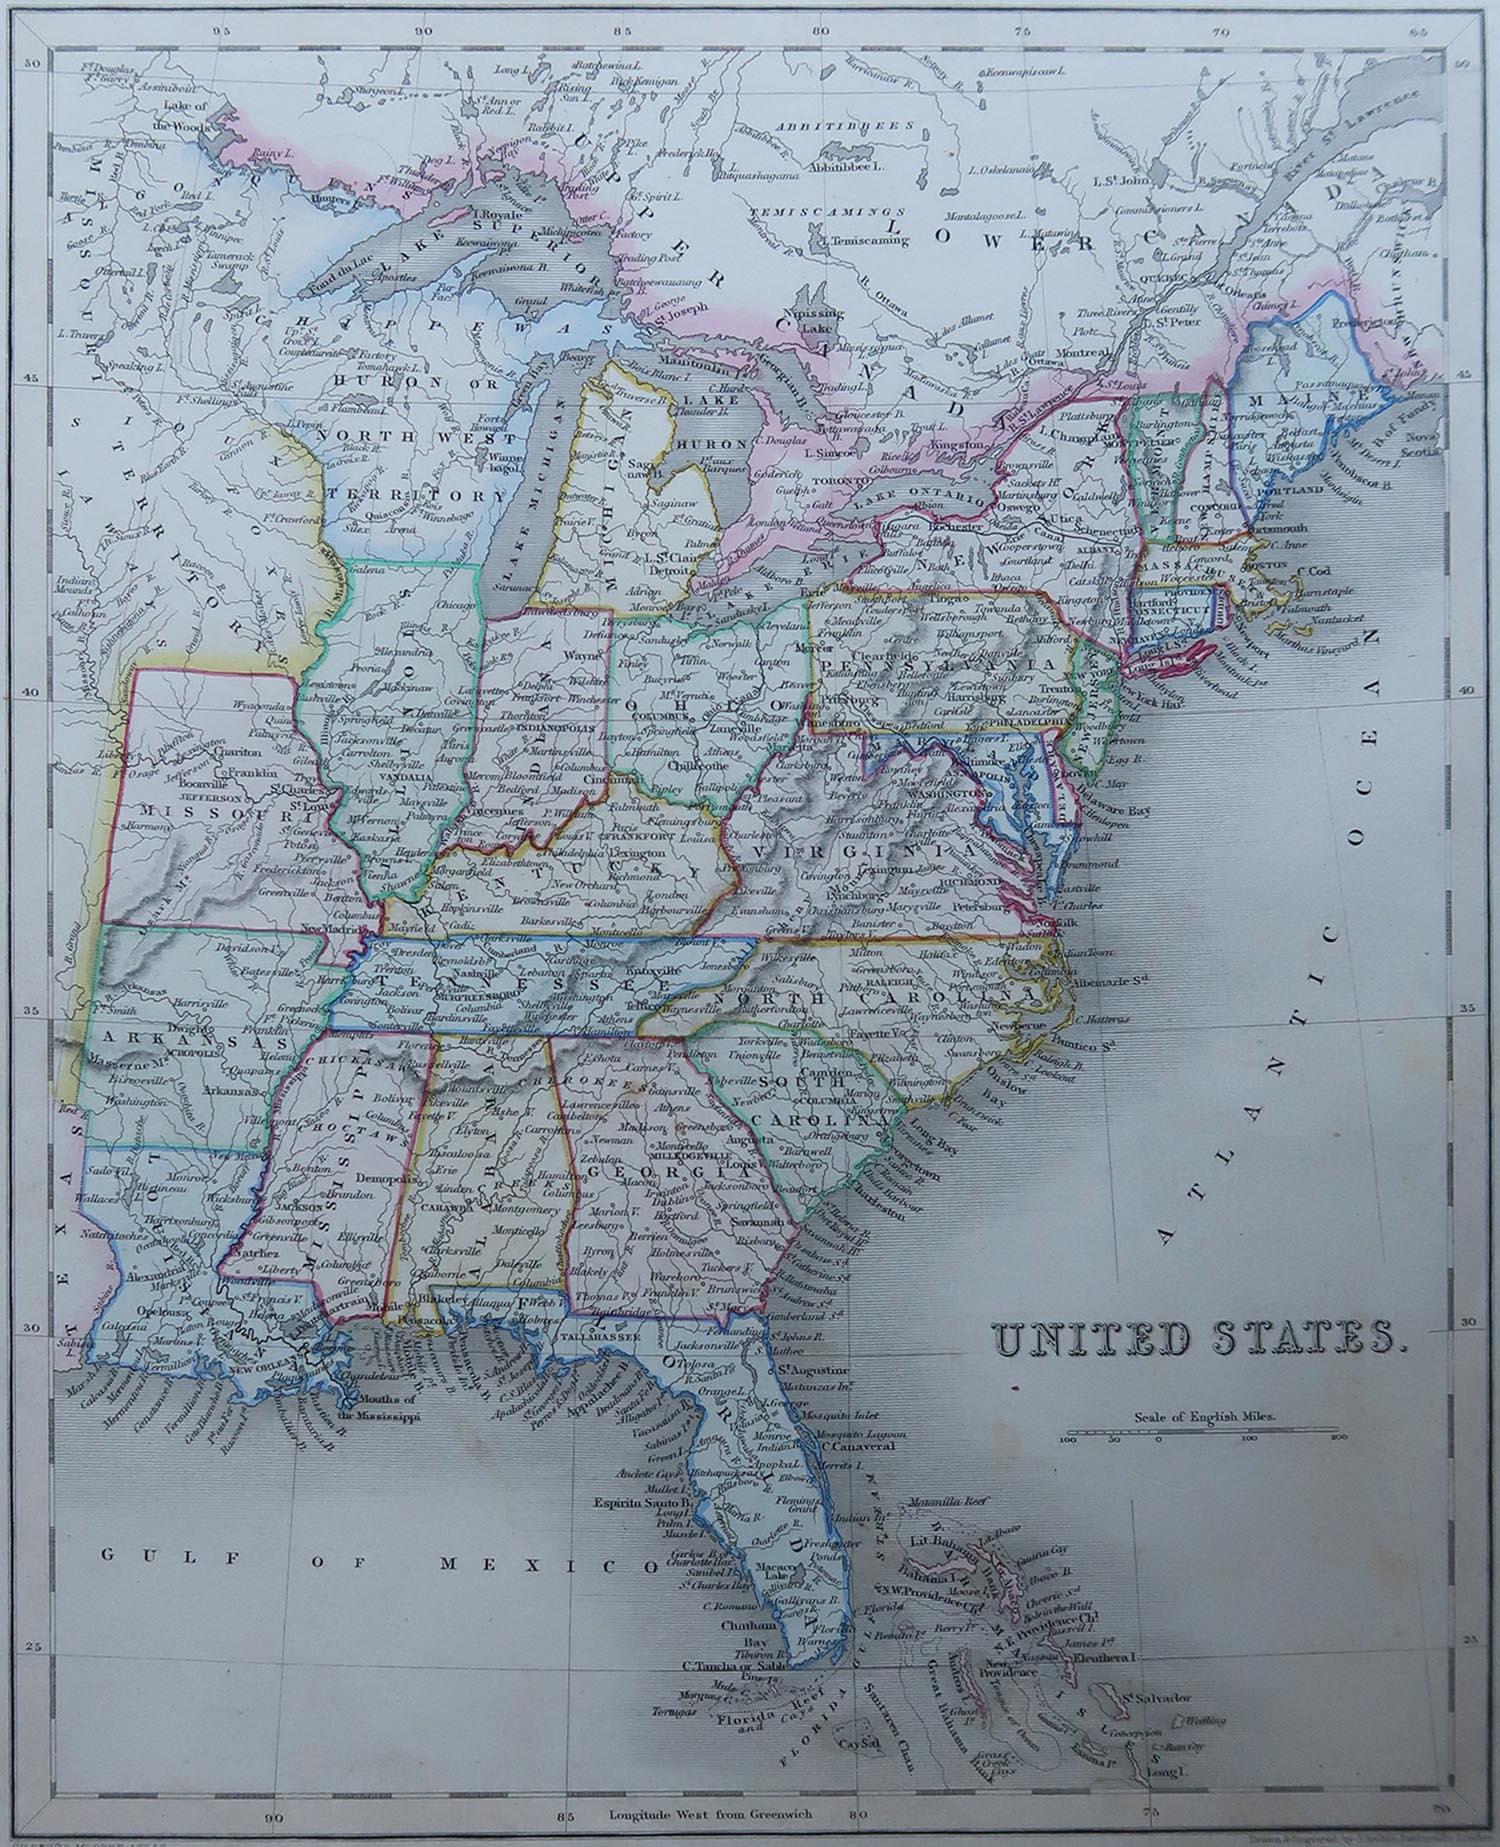 Great map of United States

Drawn and engraved by Archer

Published by Grattan and Gilbert. 1843

Original colour 

Unframed.



